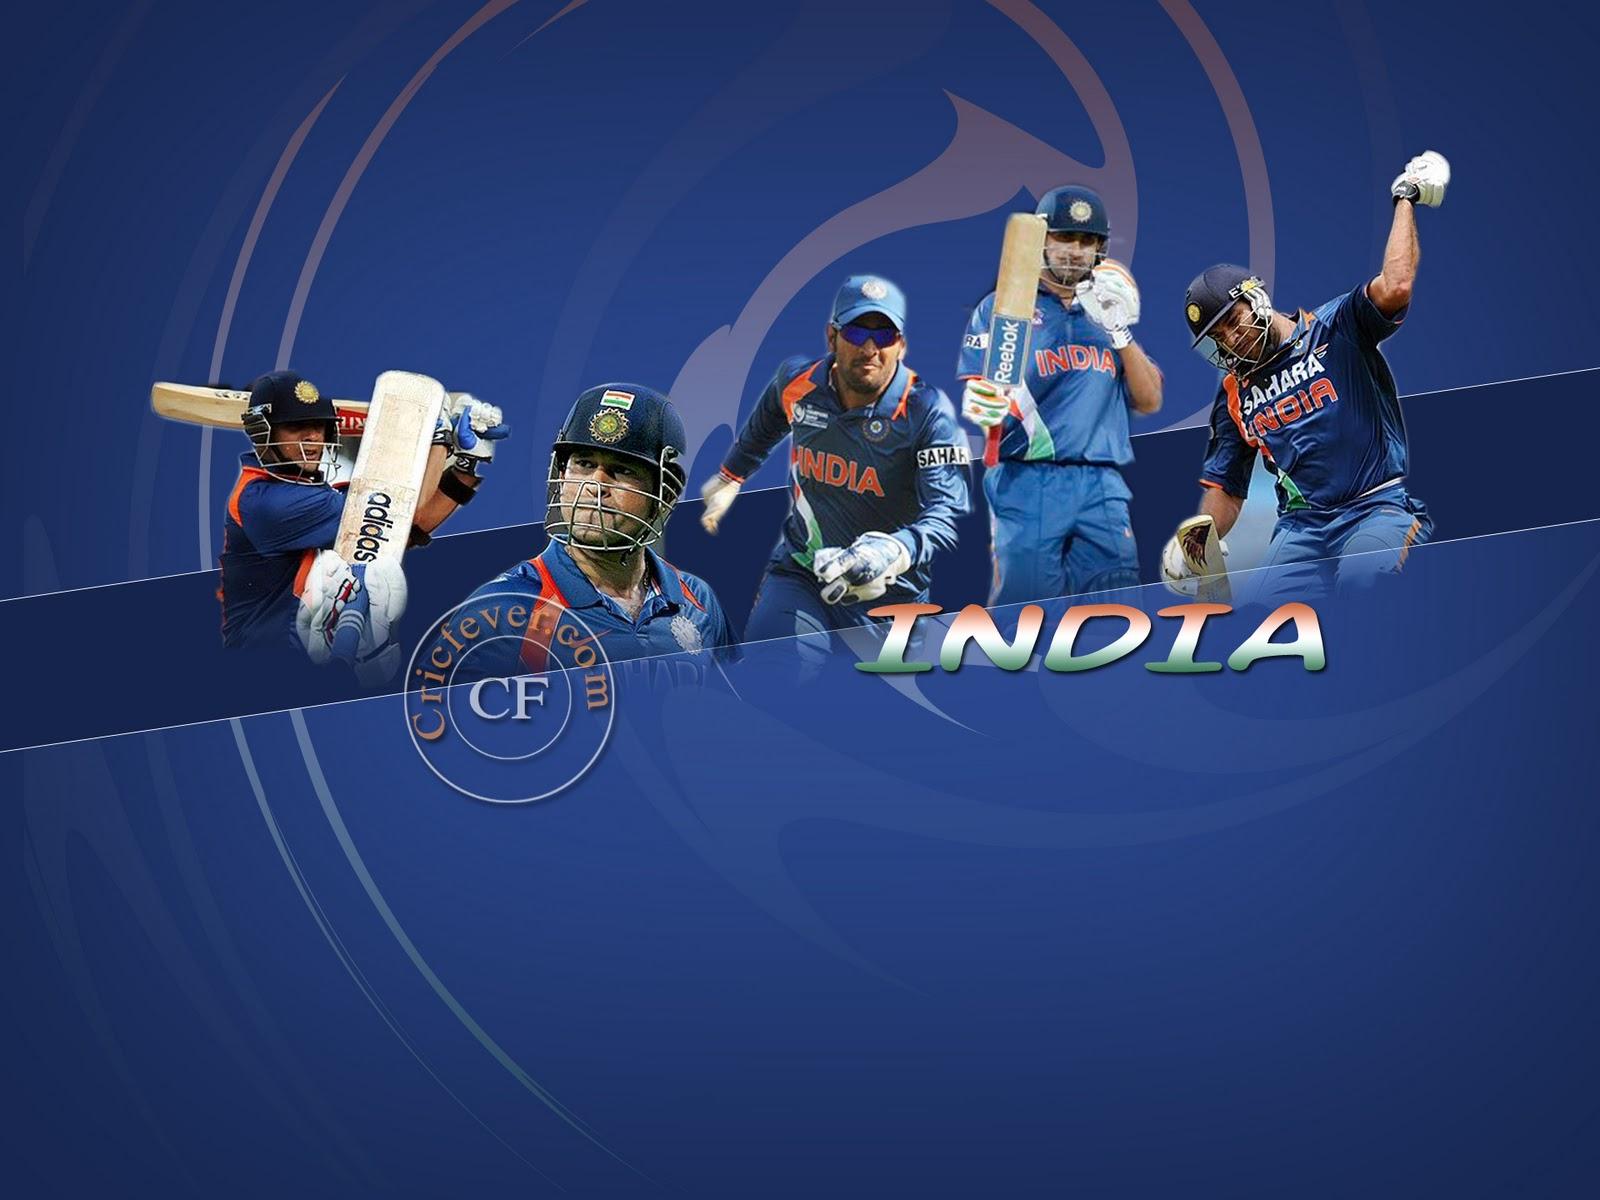 Team India For Icc World Cup Wallpaper Cricket Team Poster